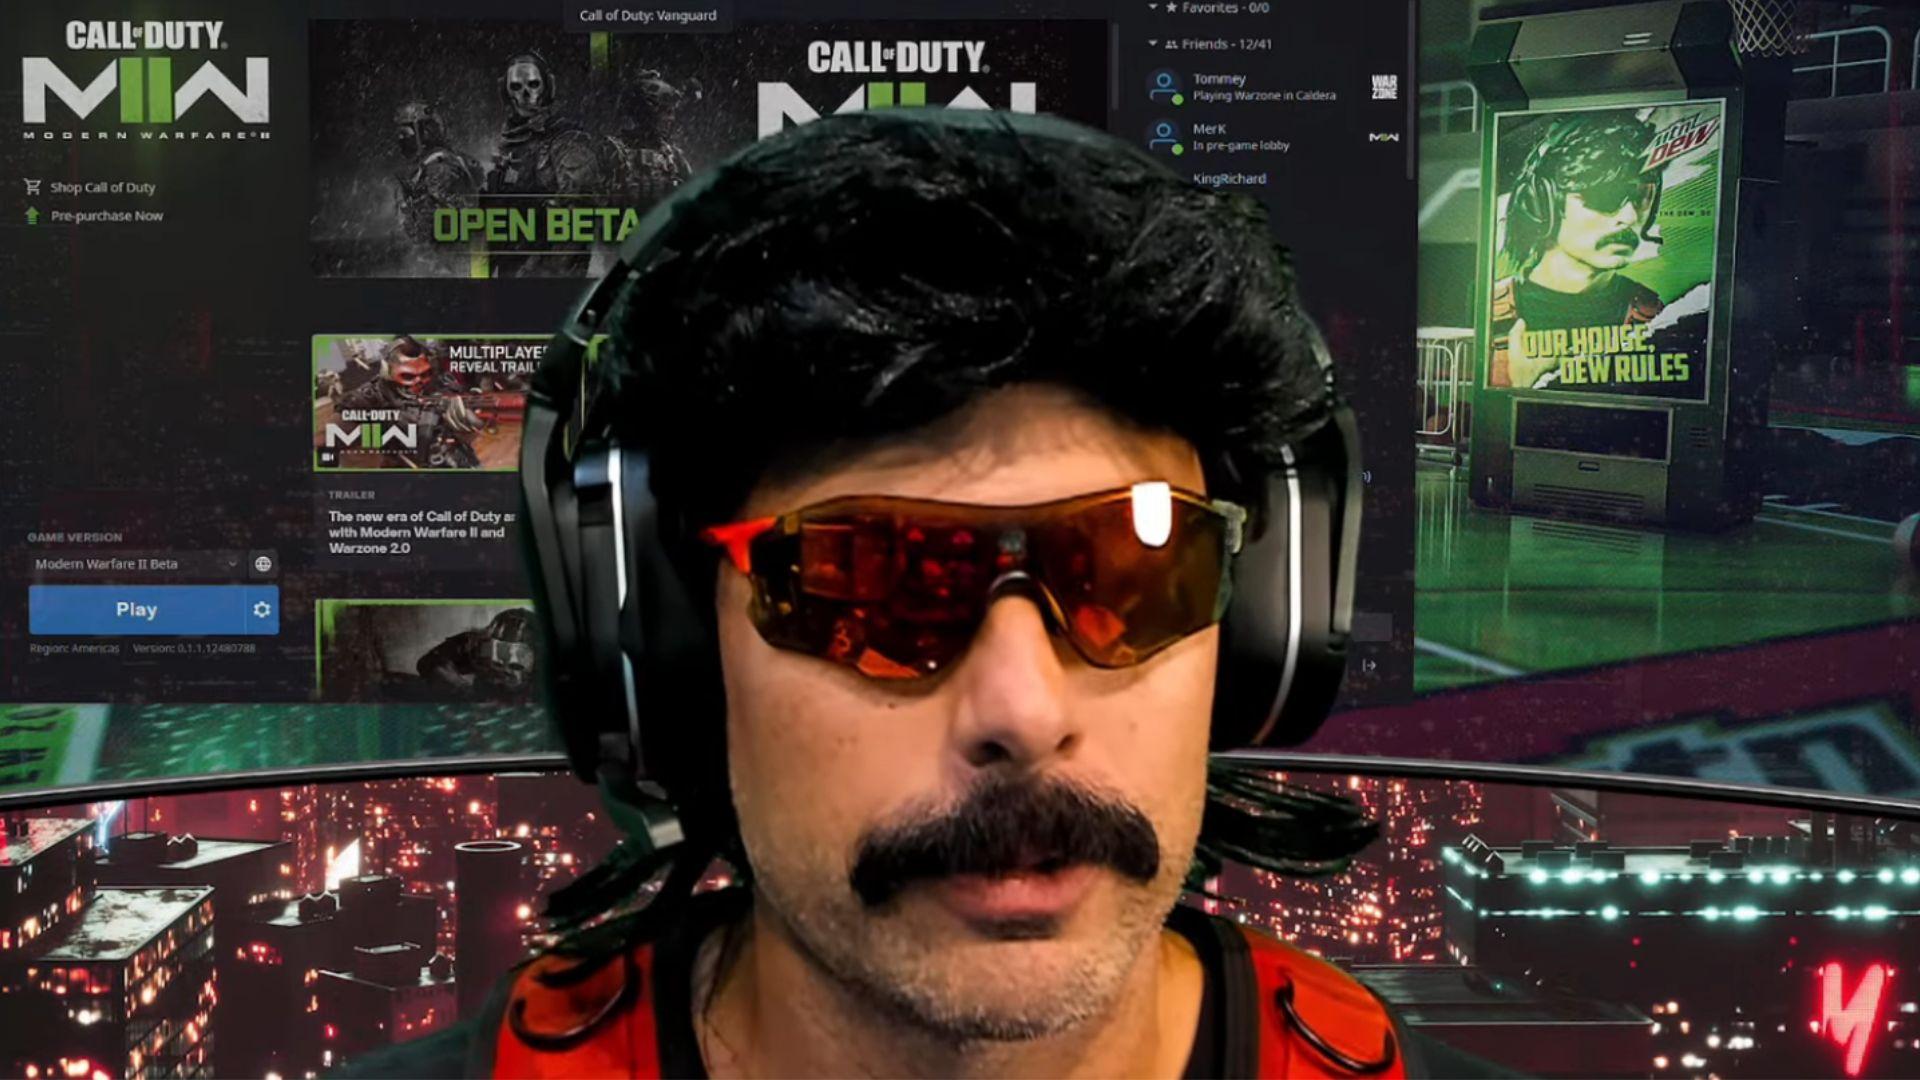 Dr Disrespect talking to camera in front of Modern Warfare 2 logo